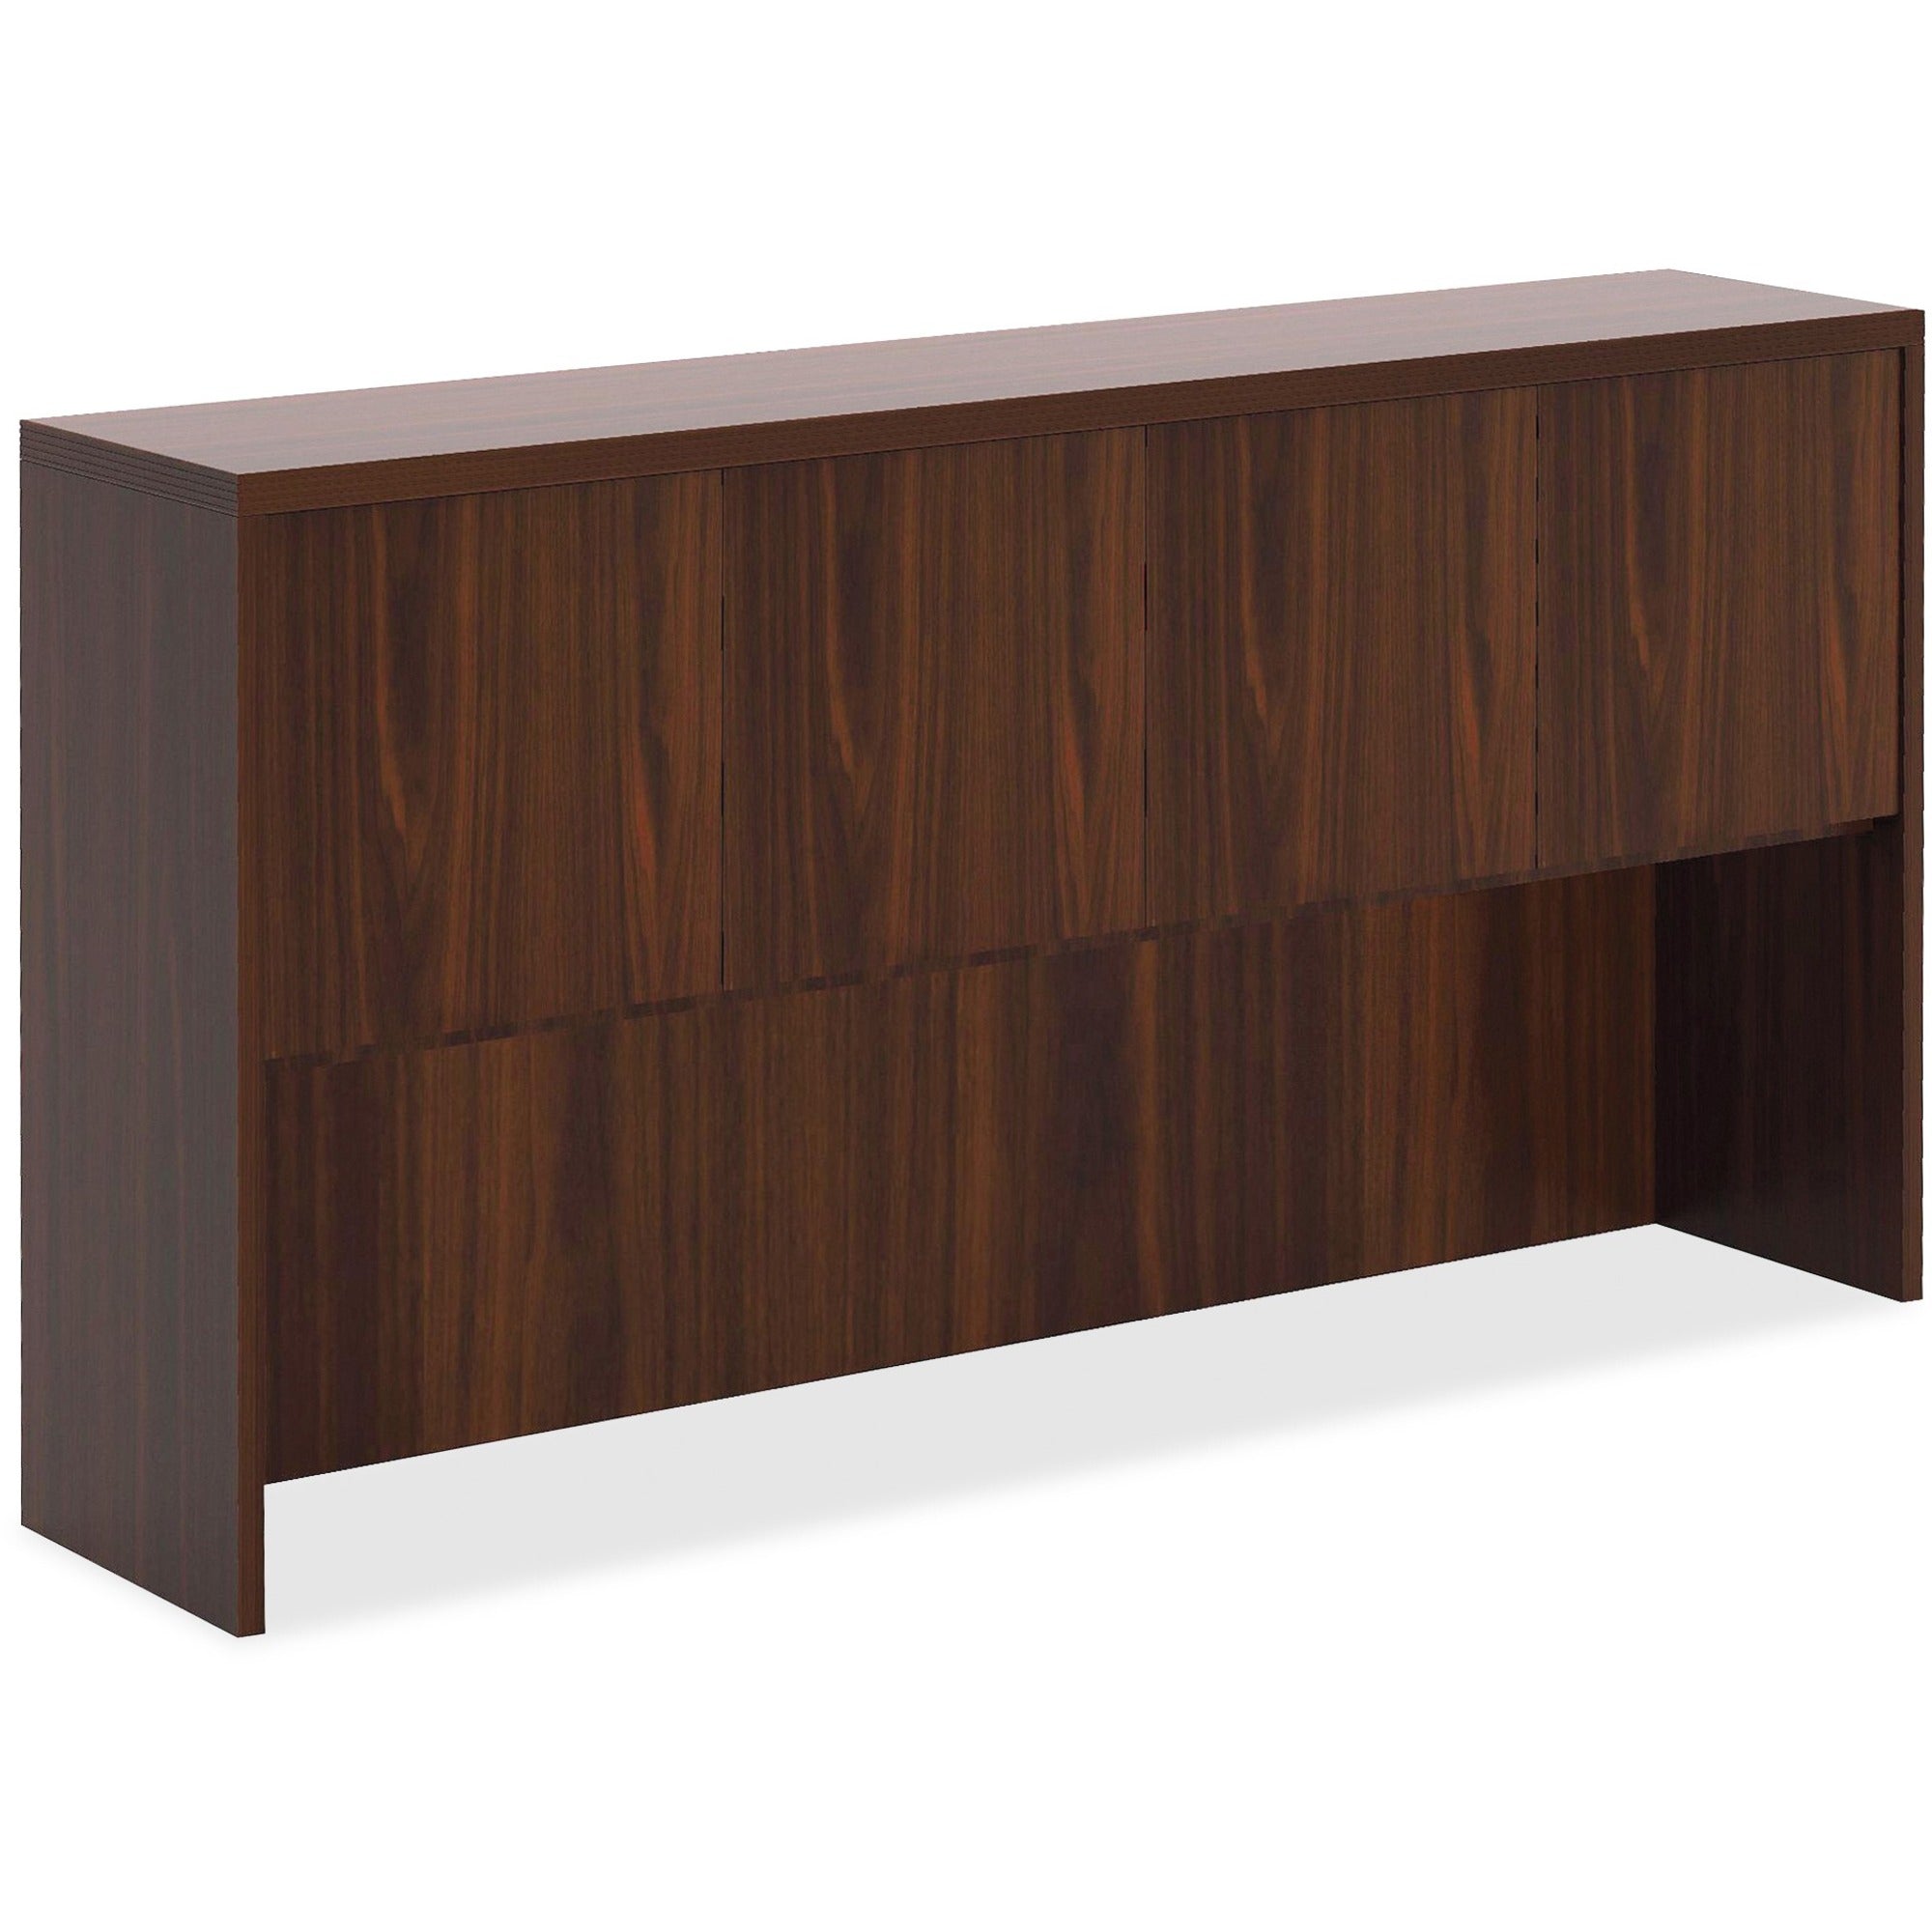 Lorell Chateau Series Hutch - 66.1" x 14.8"36.5" Hutch, 1.5" Top - 4 Door(s) - Reeded Edge - Material: P2 Particleboard - Finish: Mahogany, Laminate - Durable - For Office - 